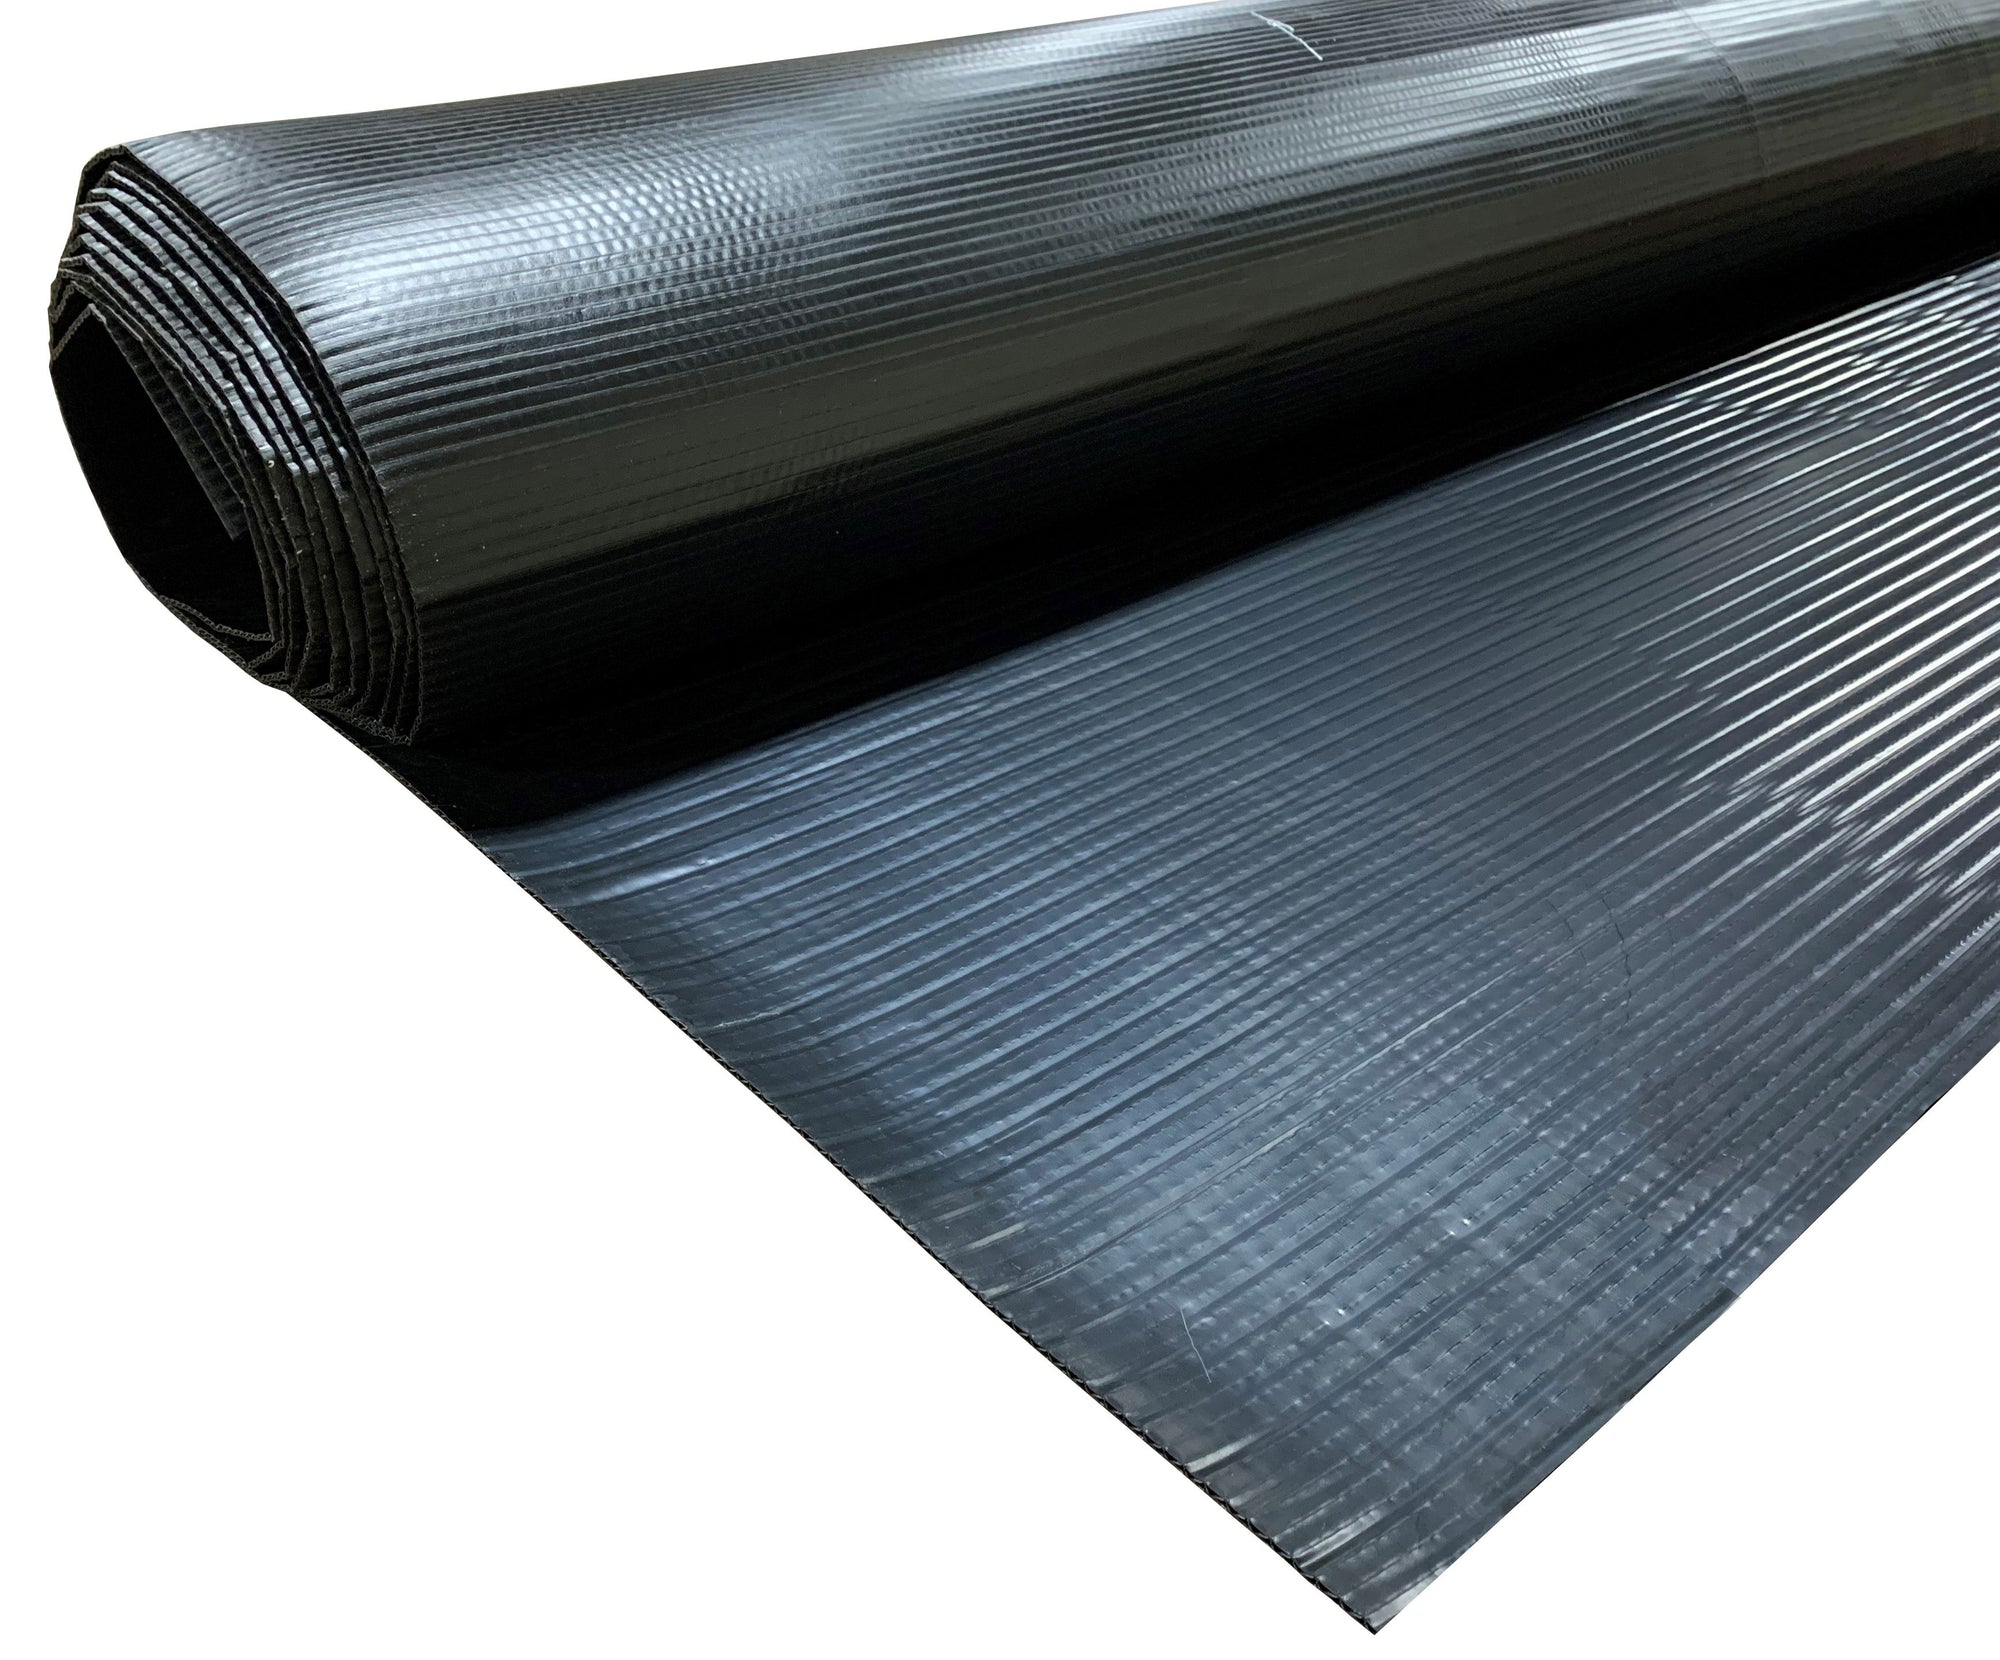 AP Products 022-BP7136 Rolled Coroplast Underbelly - 71" x 36', Black